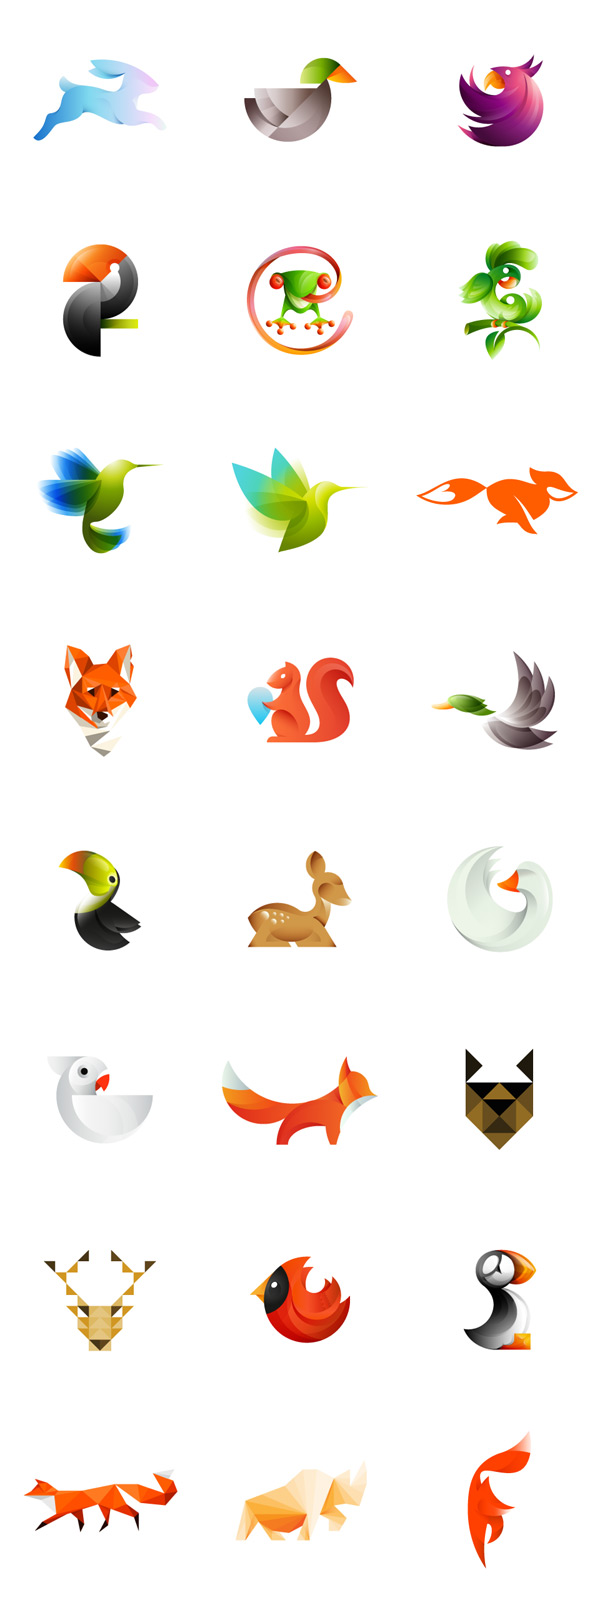 Colorful animal logos created by Ivan Bobrov, a Barnaul, Russian Federation based logo designer. The set consists of differently illustrated birds, foxes, a deer, a frog, and other lovely designed animals.